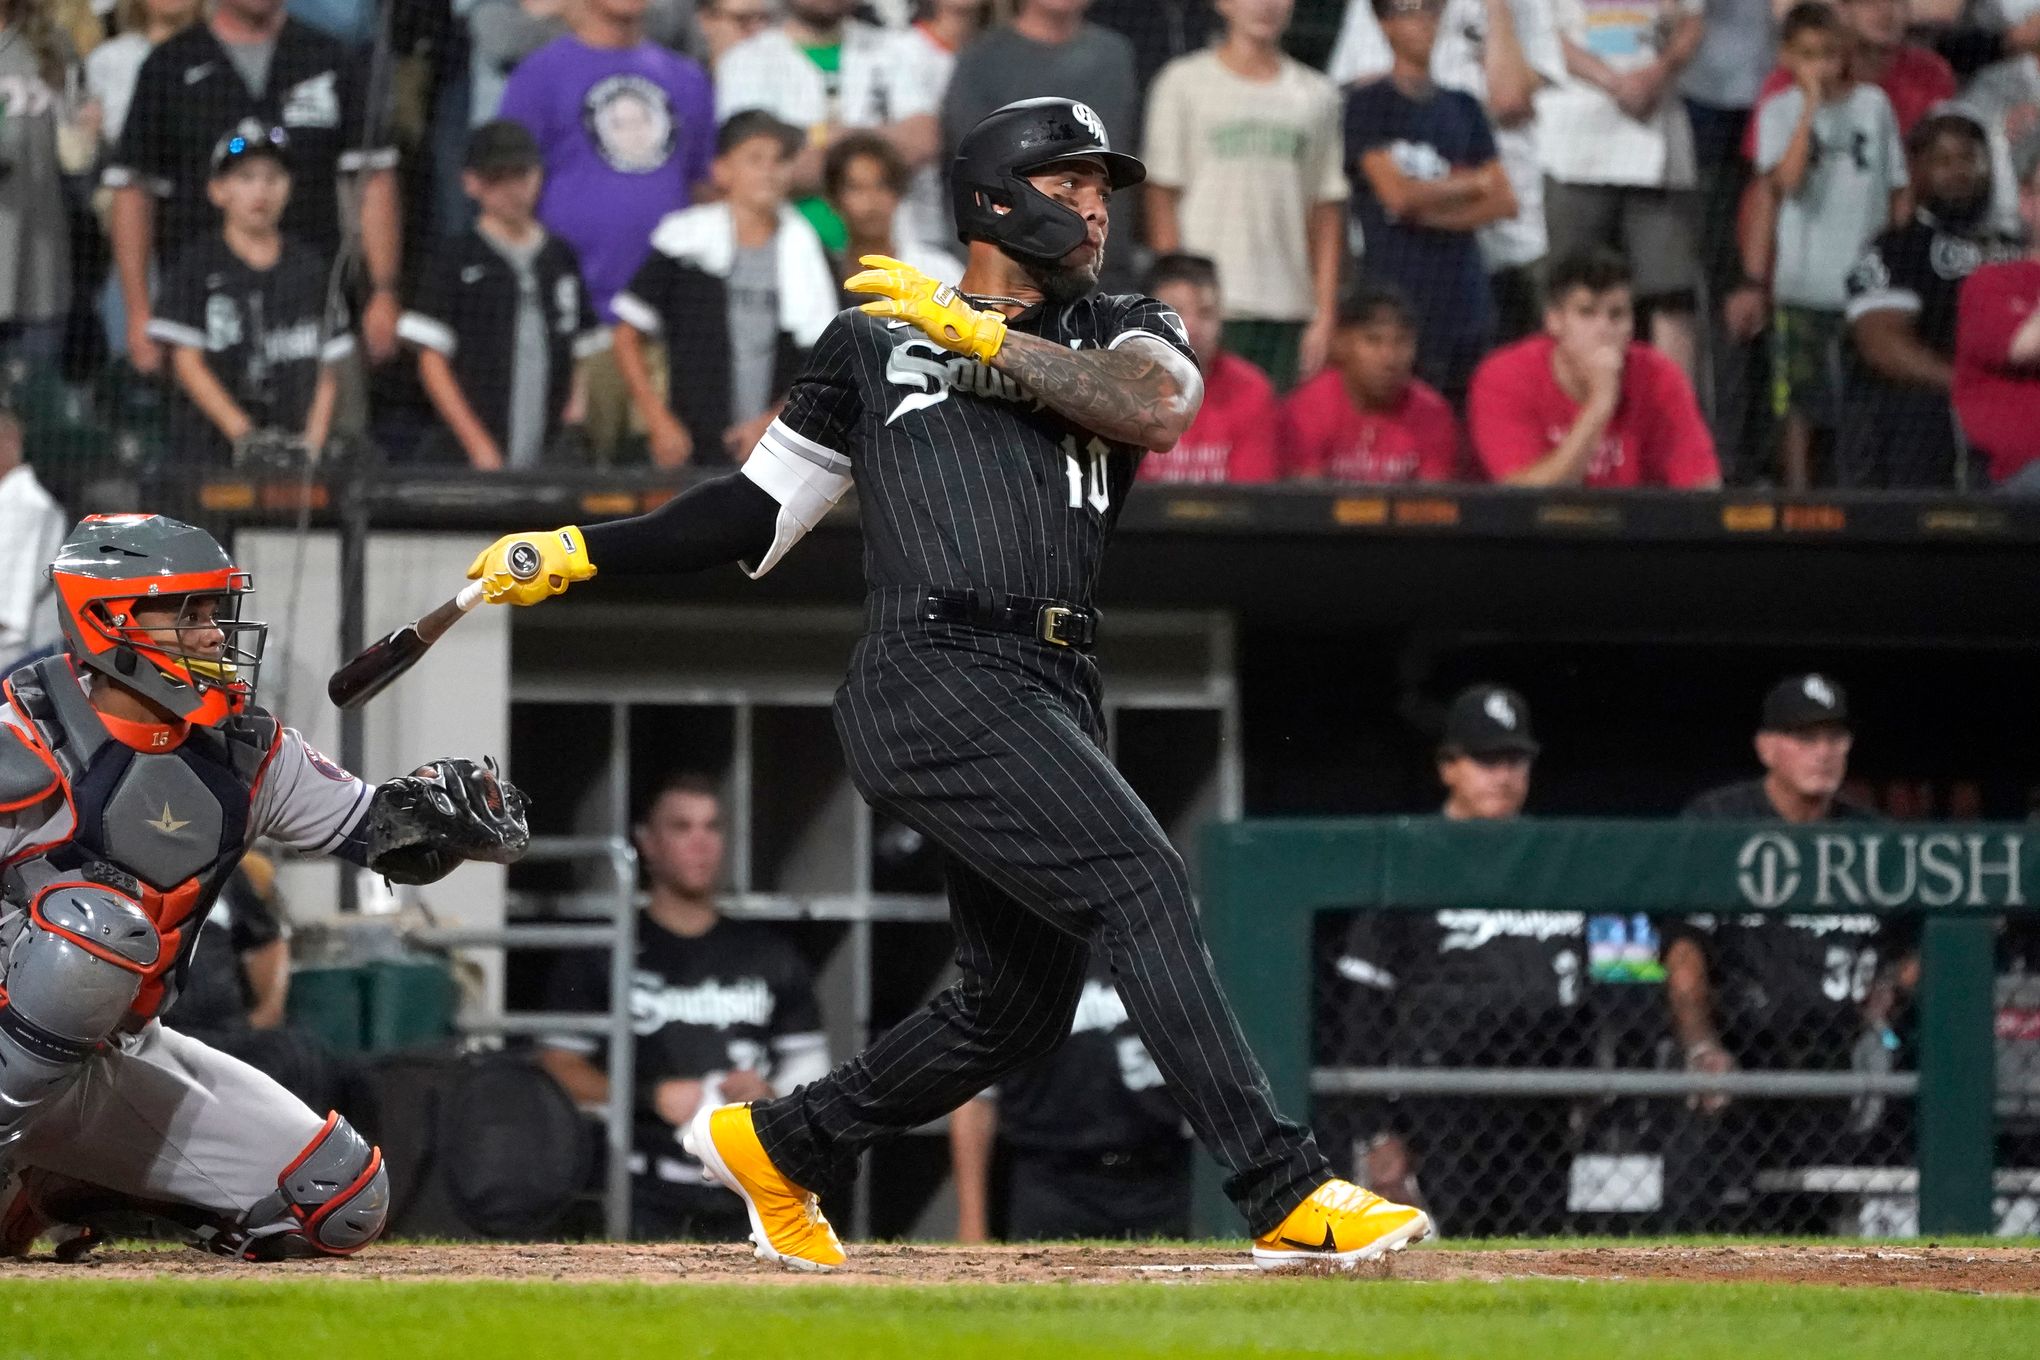 Luis Robert Jr.'s walk-off single gives Chicago White Sox their